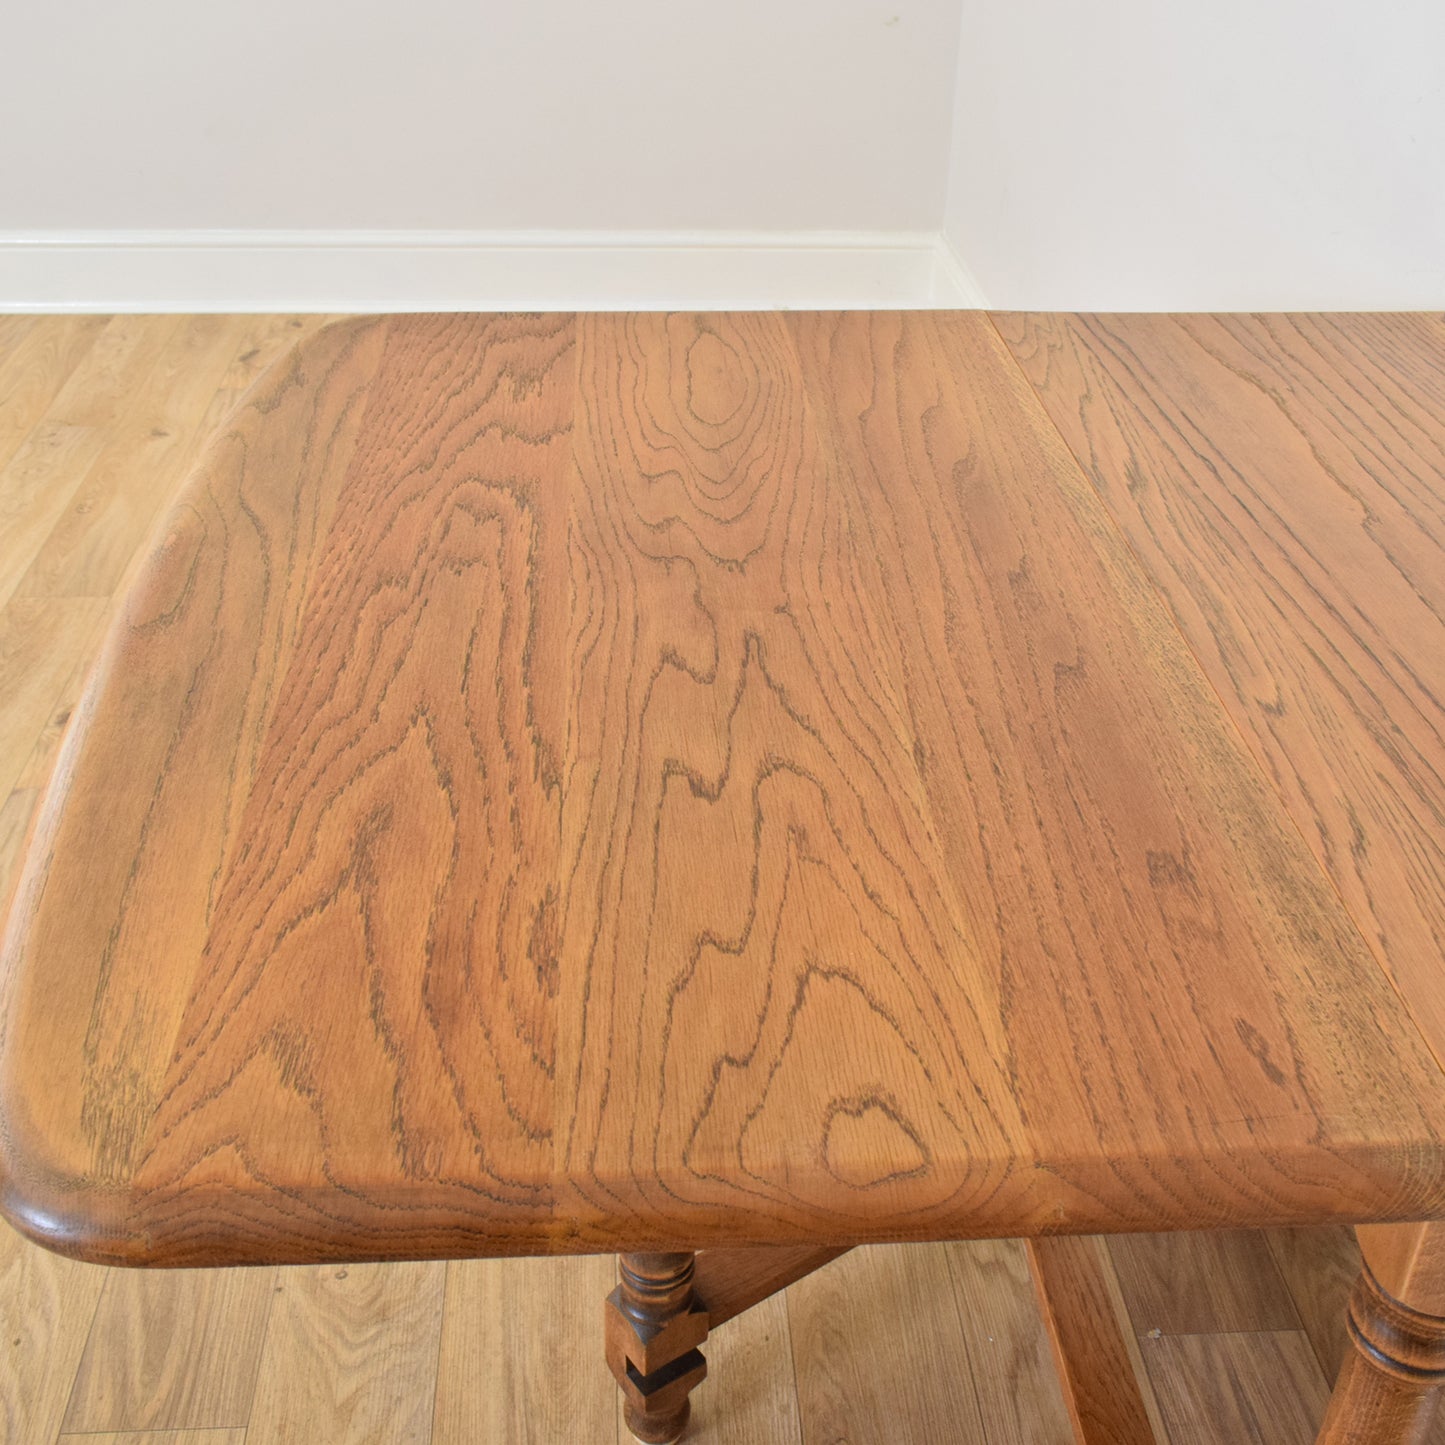 Oak Drop Leaf Table And Four Chairs